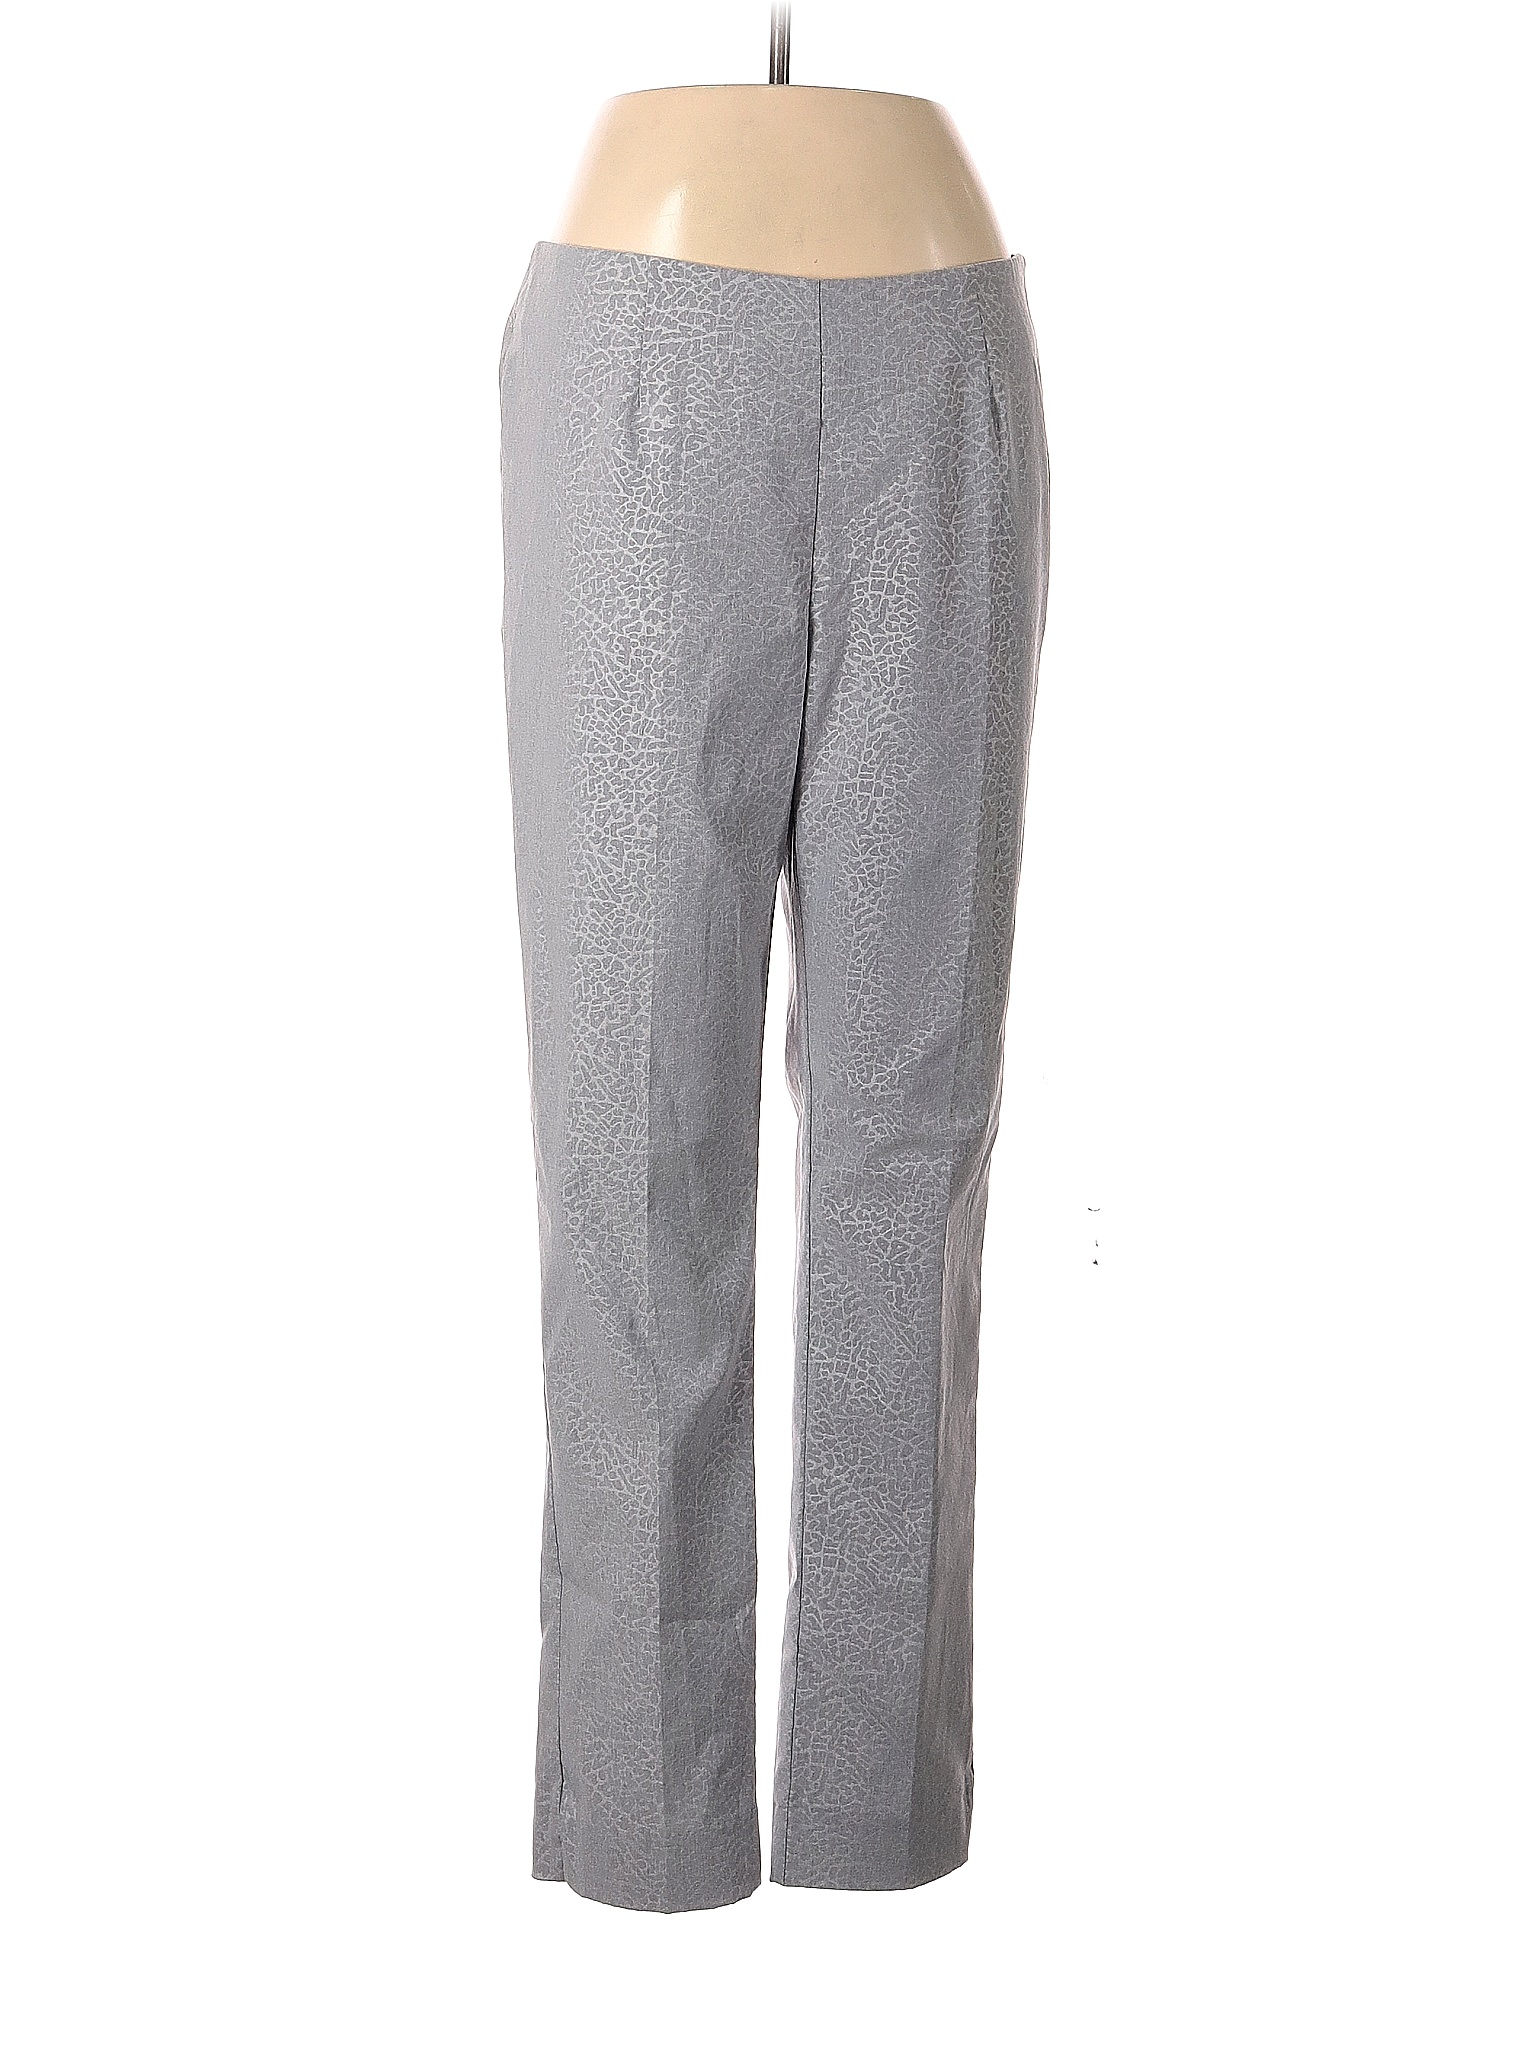 Eric Signature Women's Pants On Sale Up To 90% Off Retail | thredUP